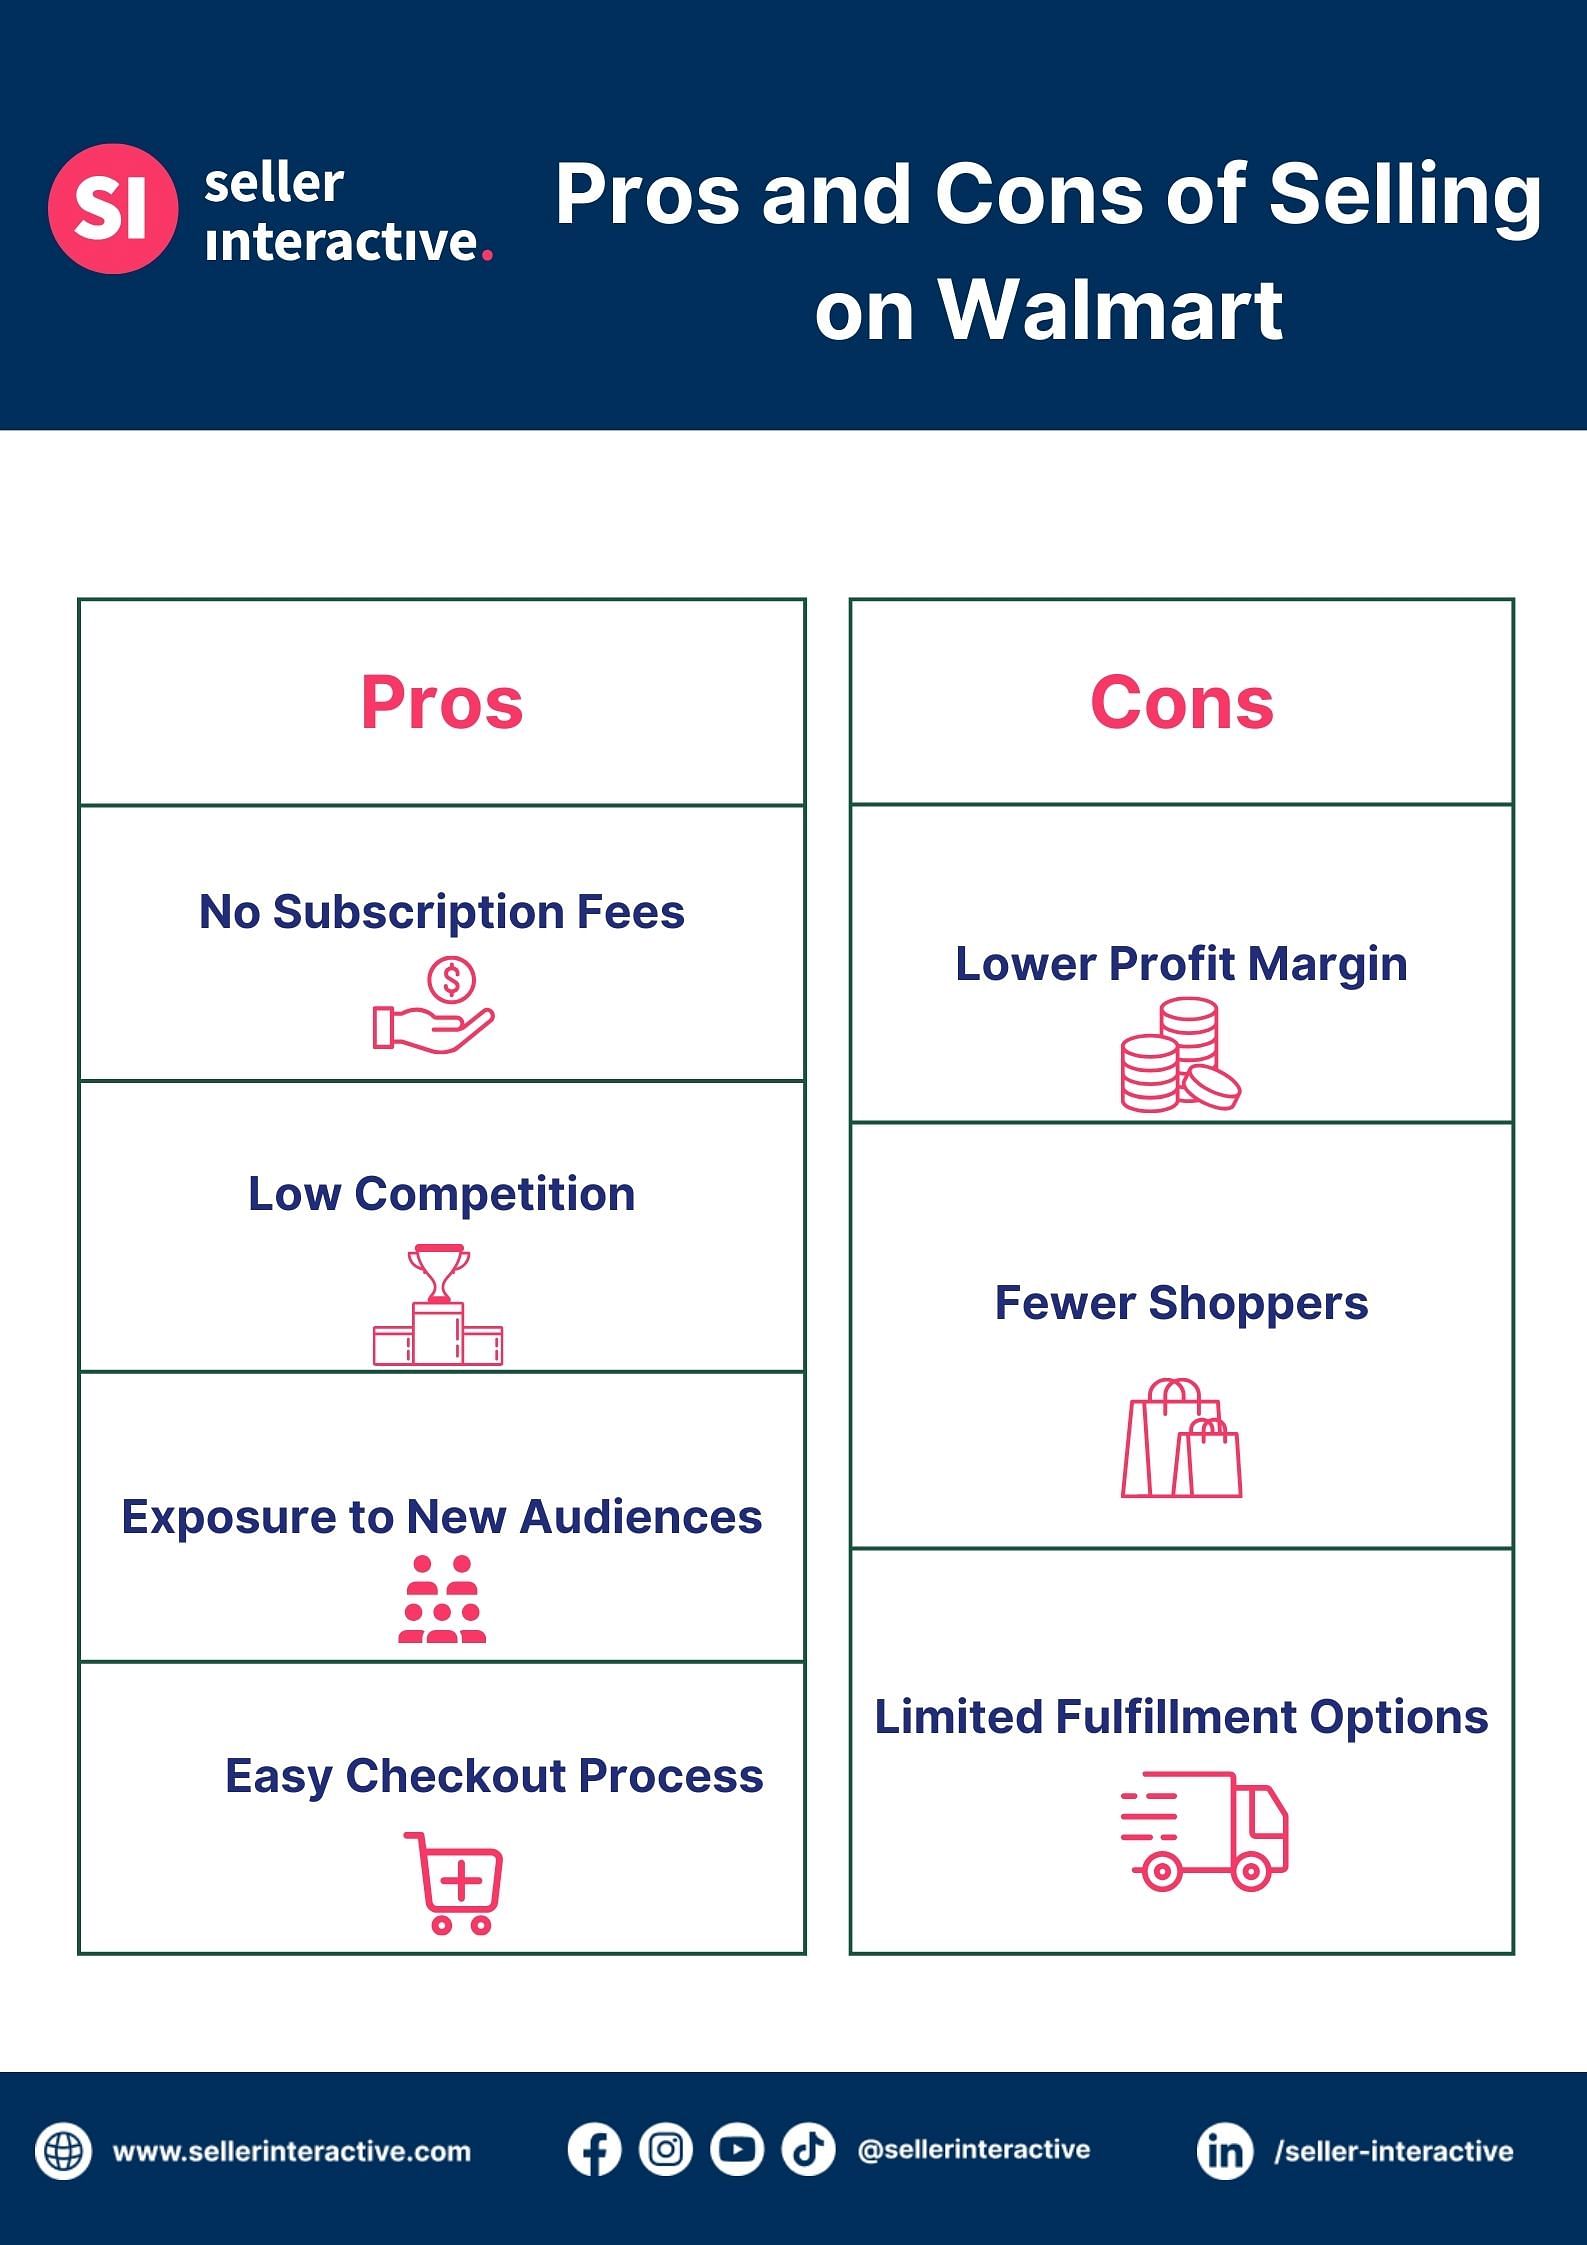 a graphic showing pros and cons of selling on walmart, pros: no subscription fees, low competition, exposure to new audiences, easy checkout process, cons: lower profit margin, fewer shoppers, and limited fulfillment options.